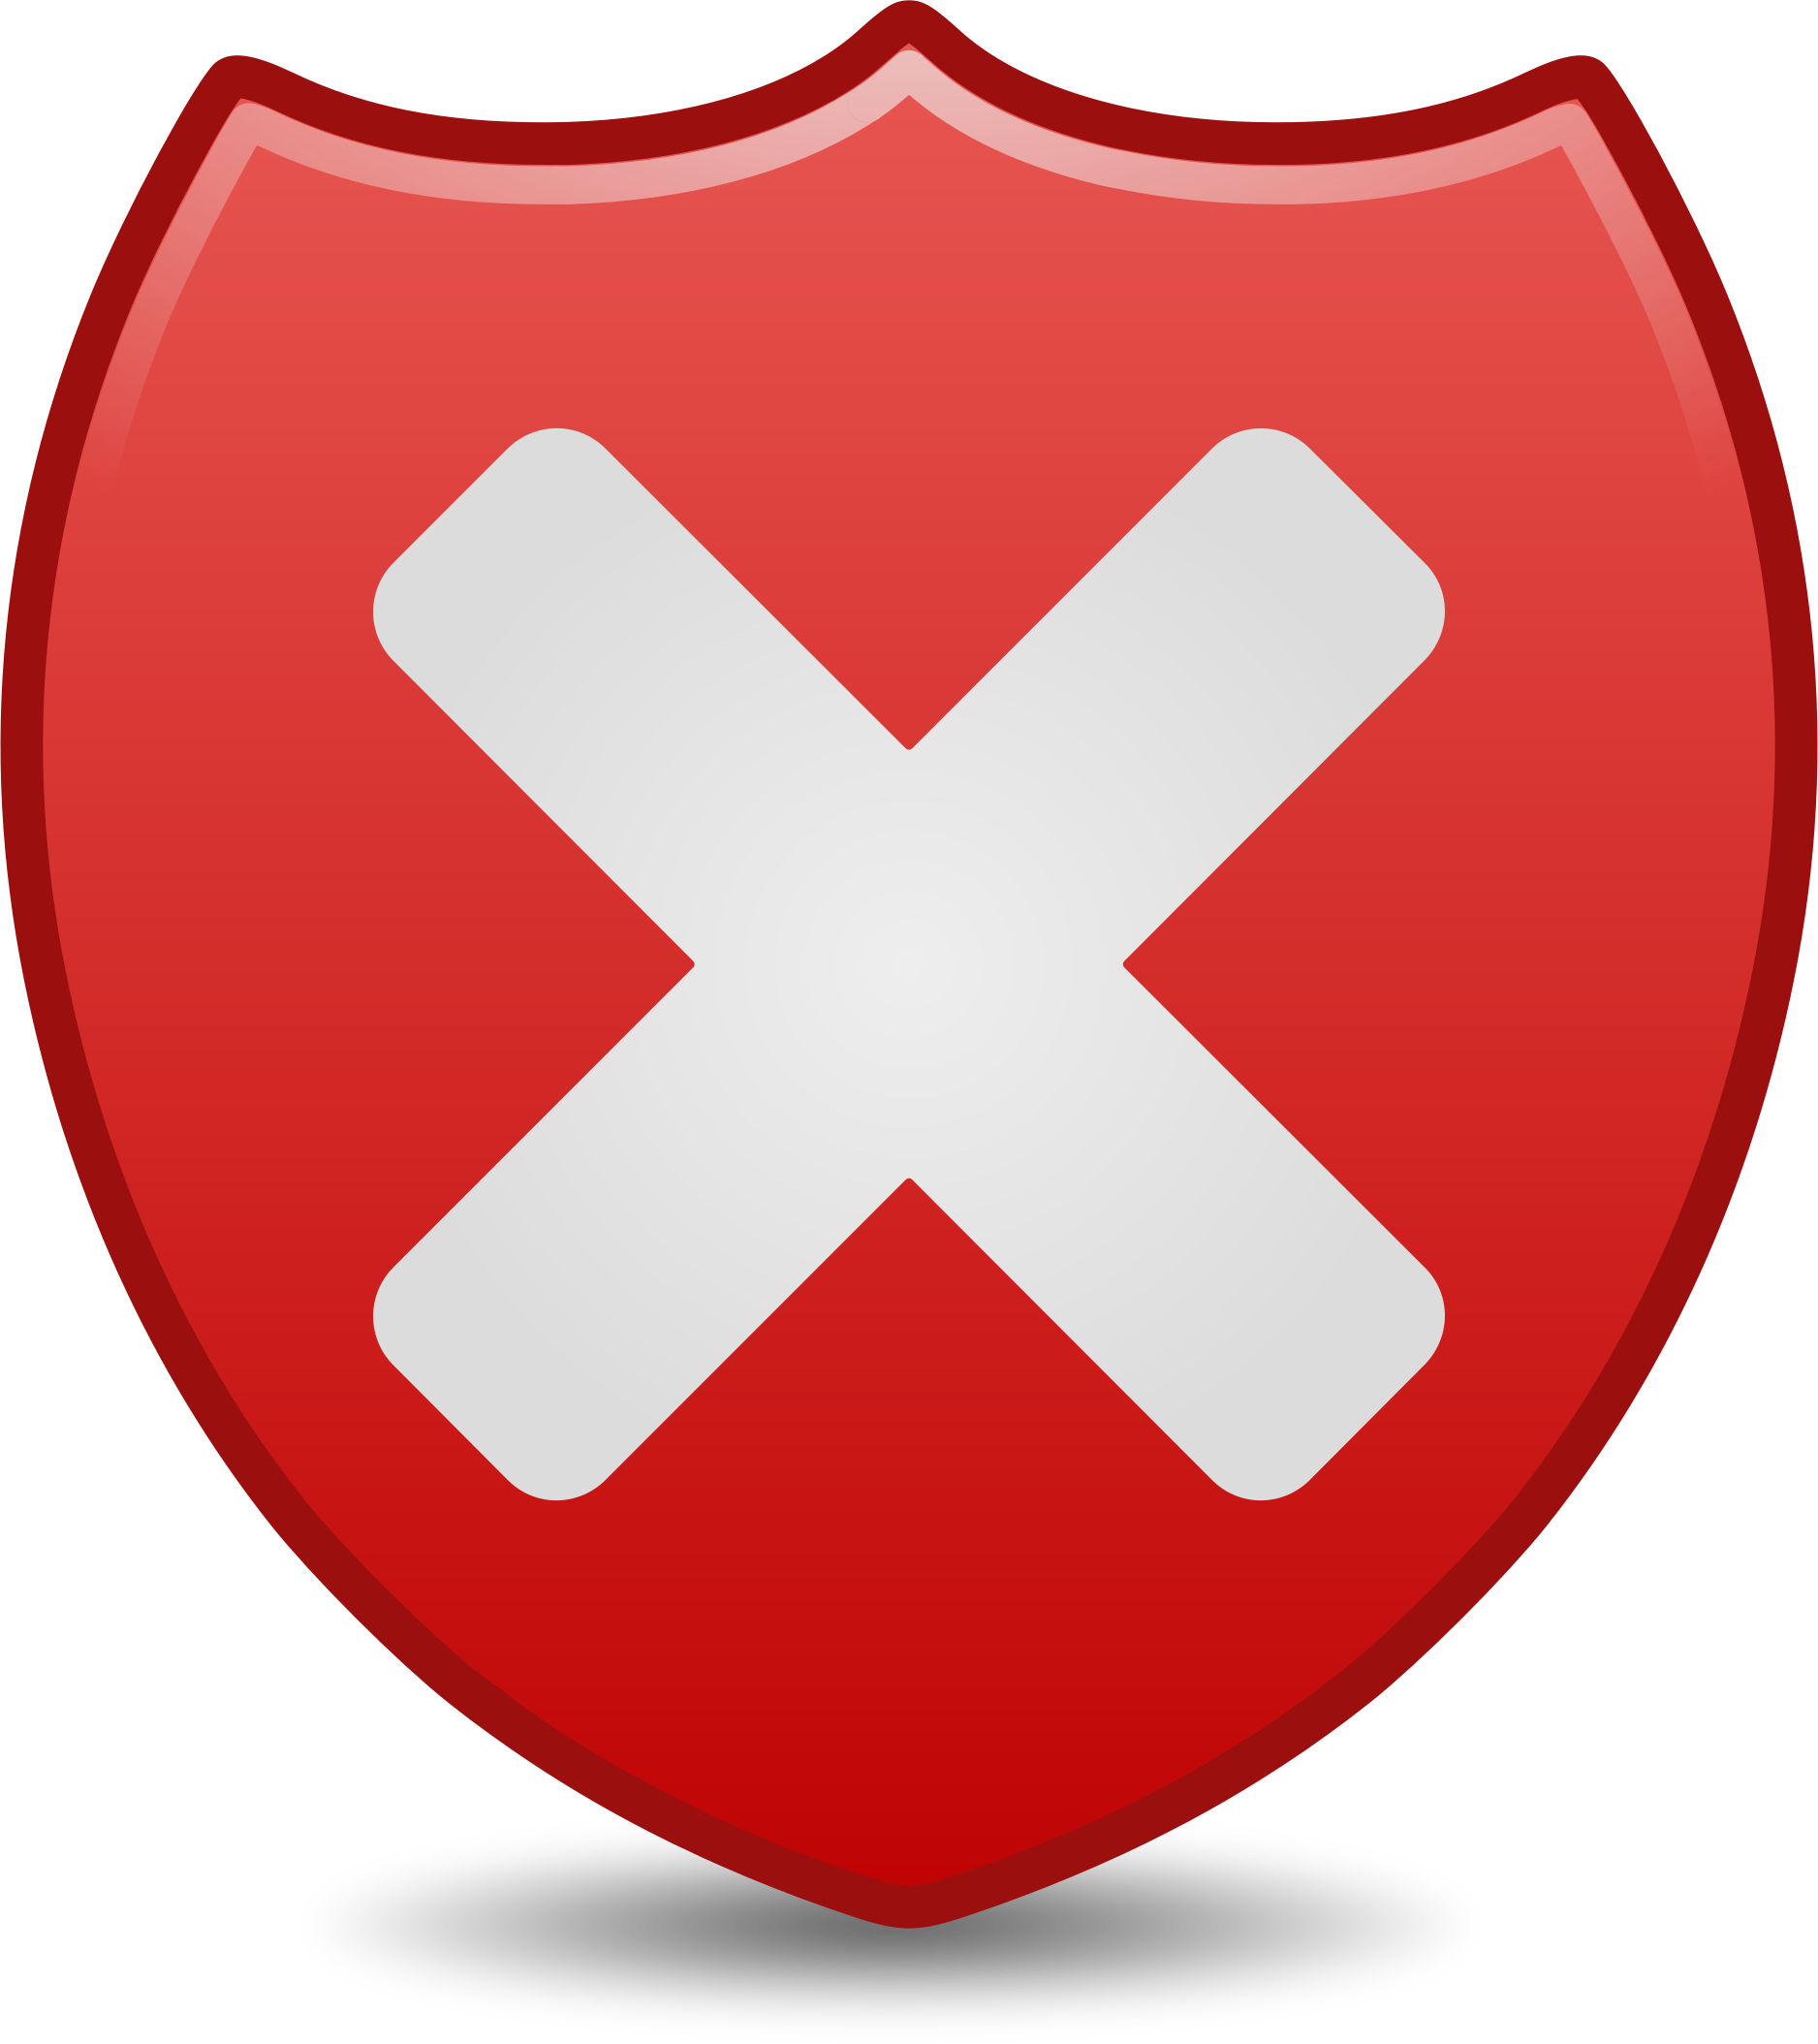 Security Low Clip Art At Clker - Low Security Icon (1876x2109)